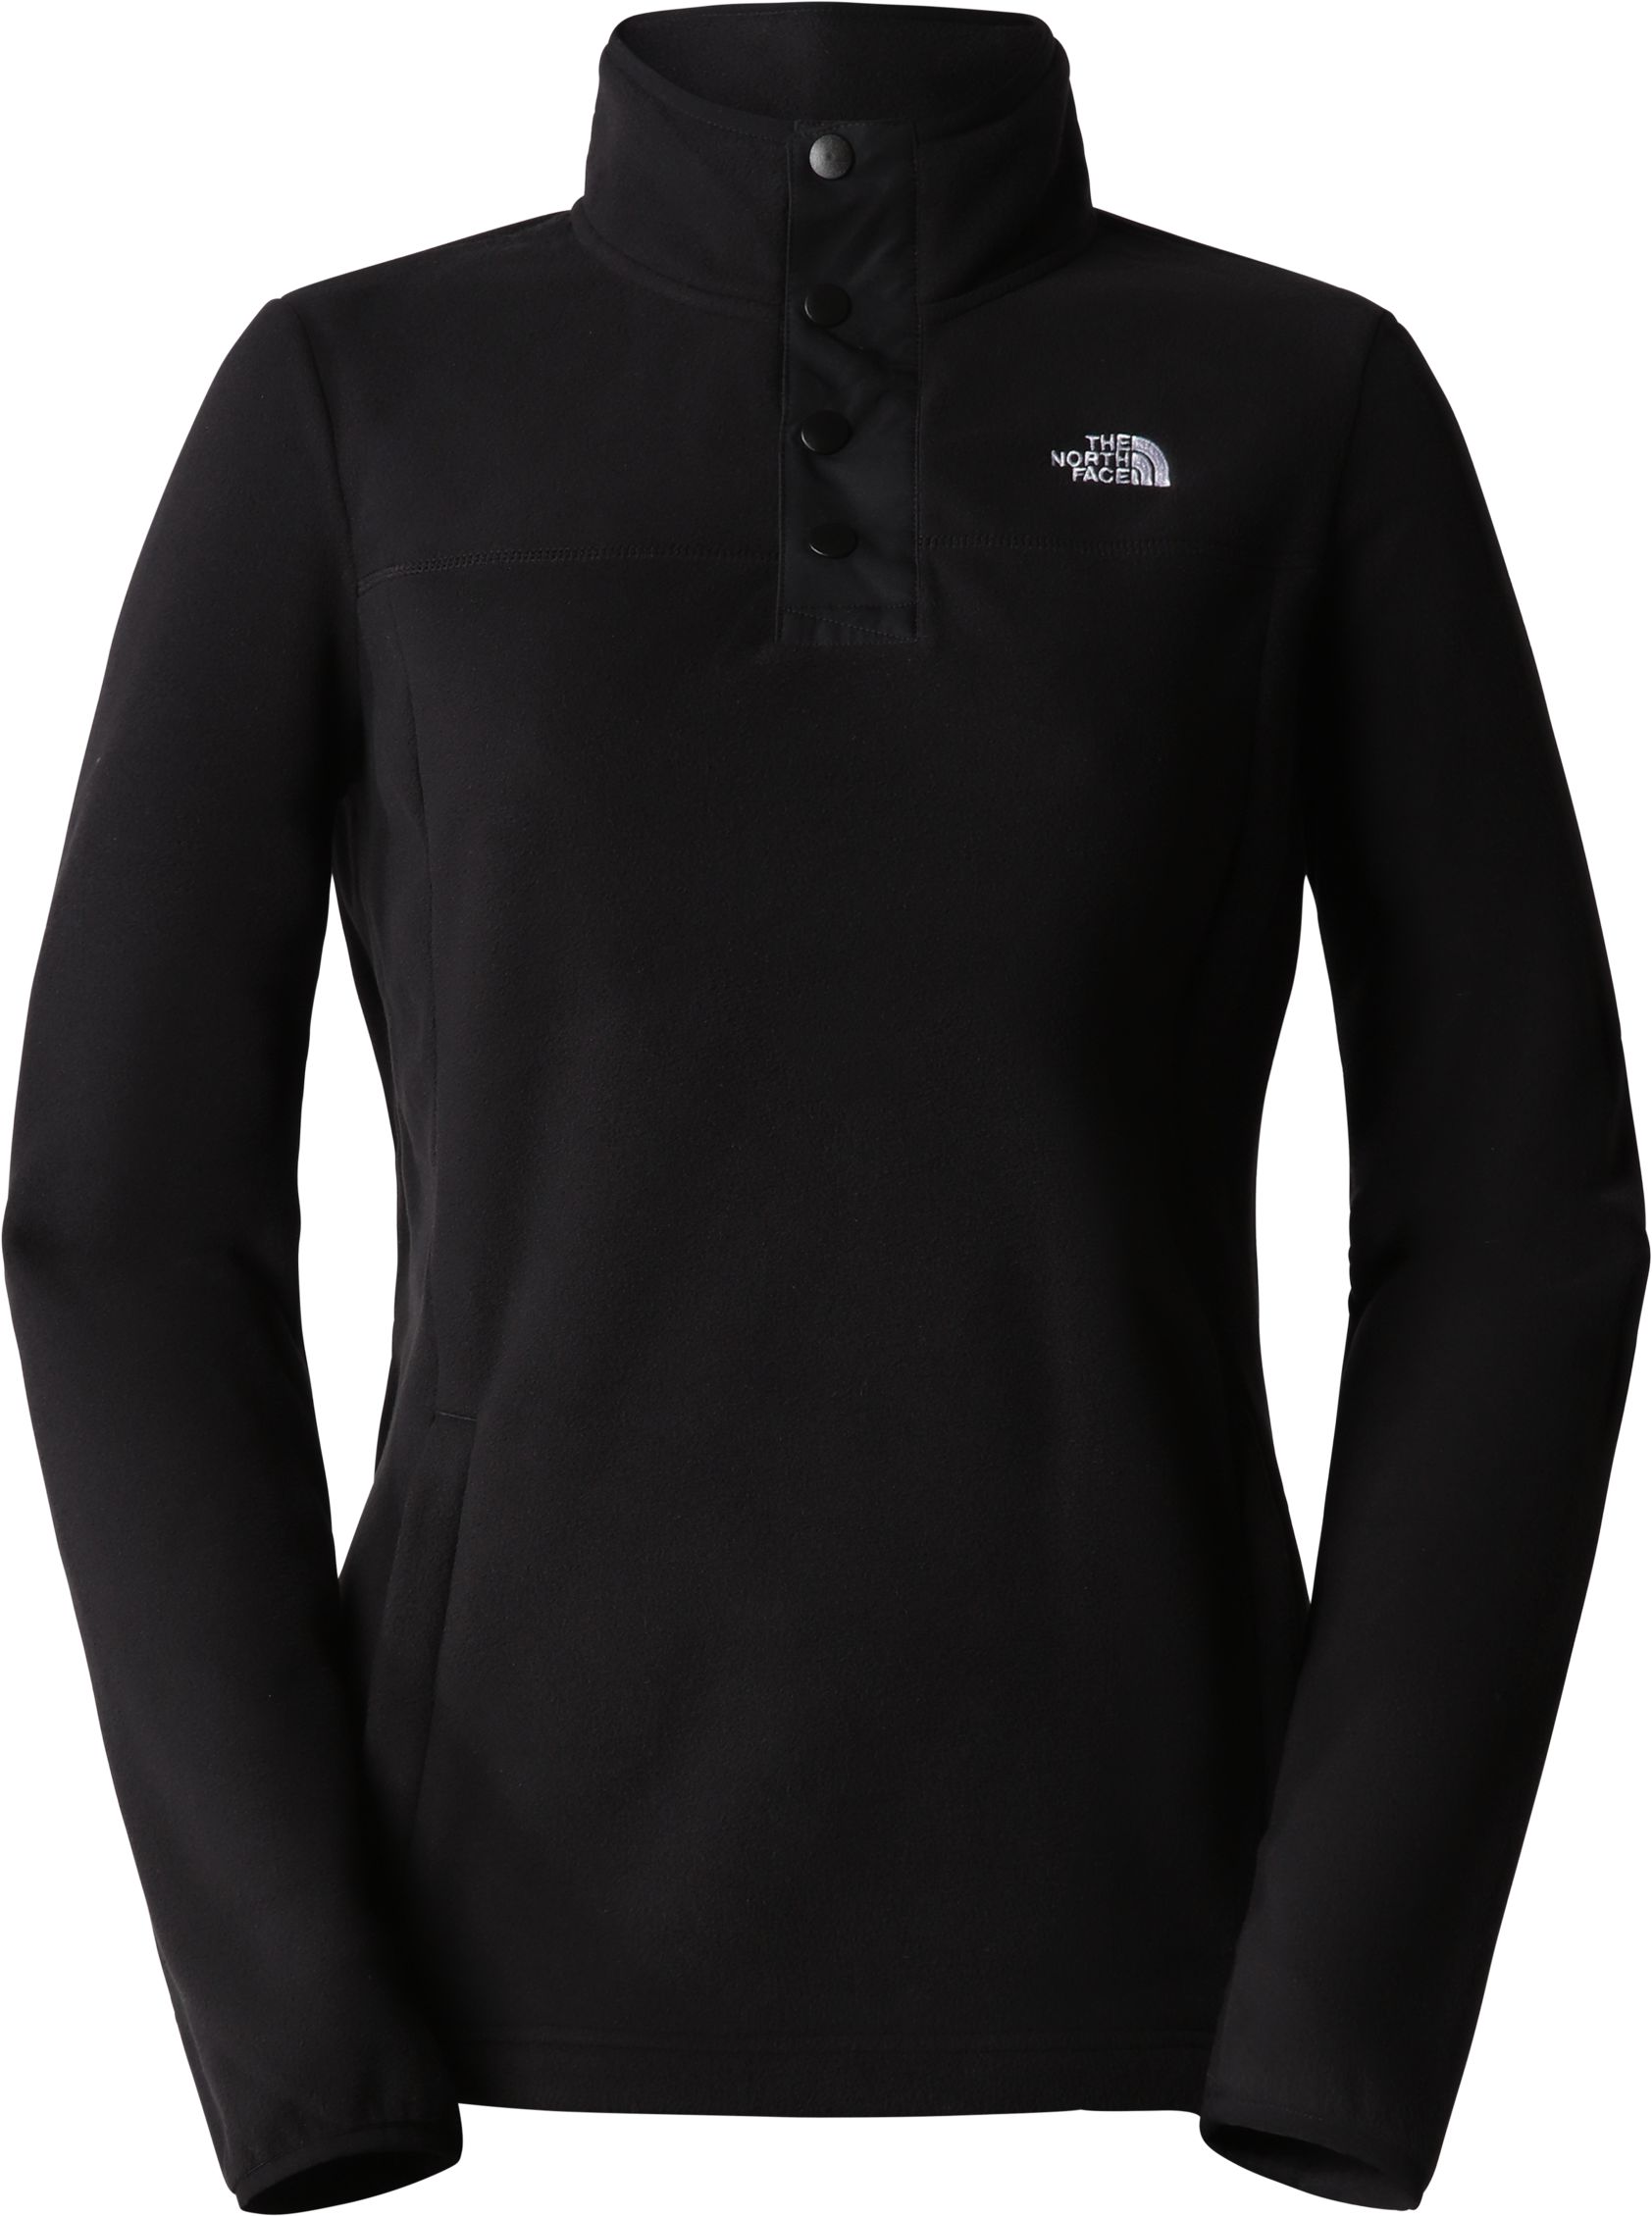 THE NORTH FACE, W HOMESAFE SNAP NECK FLEECE PULLOVER